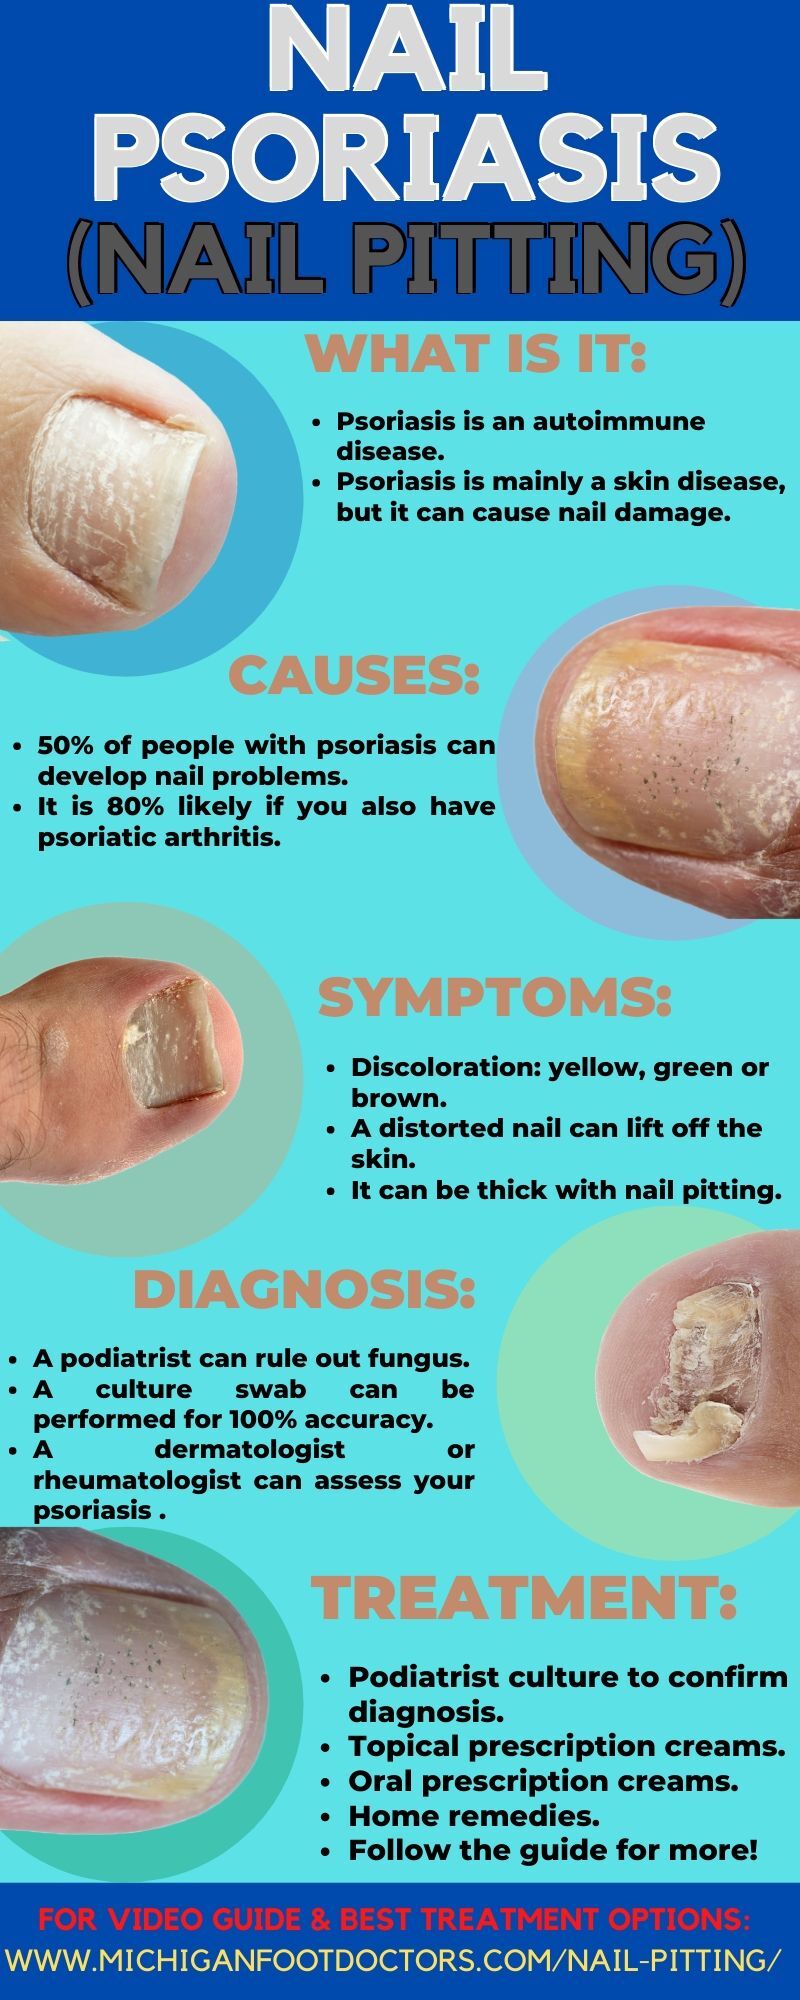 Nail Fungus vs Nail Trauma Resulting in Thick Nail - See history &  questions in comments please! : r/NailFungus